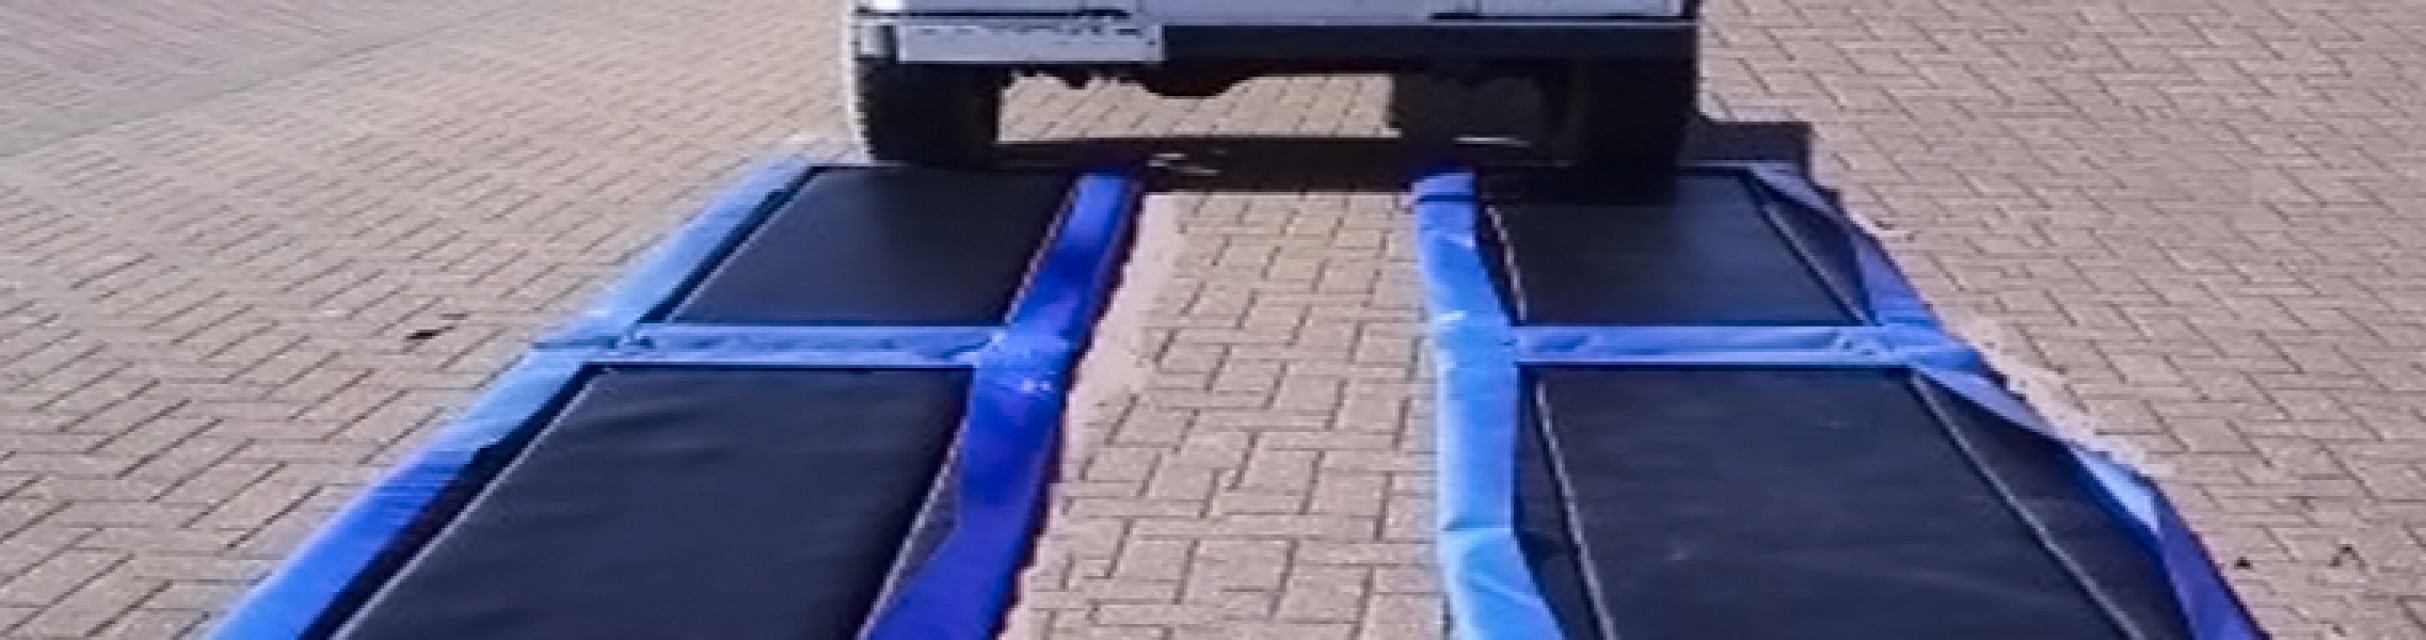 Vehicle Disinfection Mats - Efficient Tire Disinfection for Disease Prevention